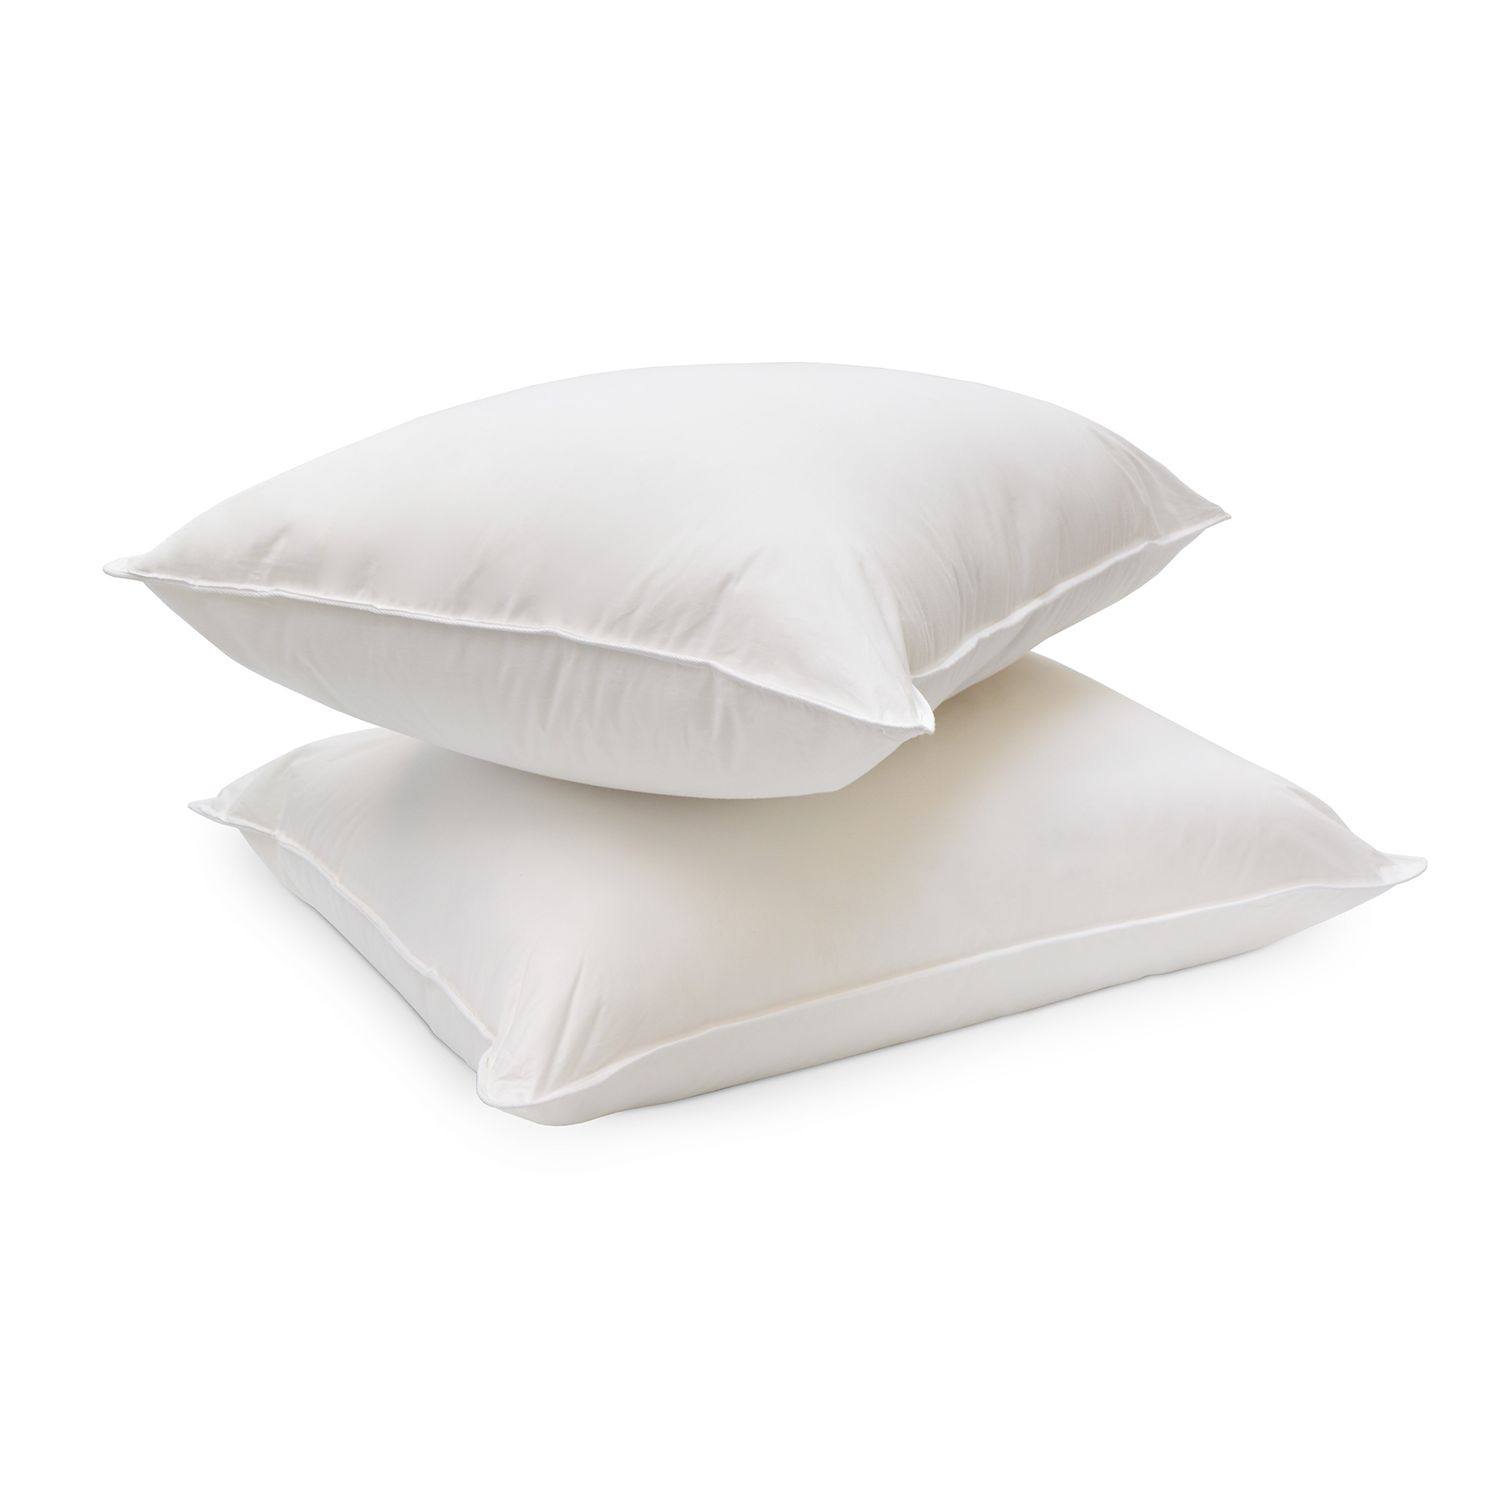 tommy bahama pillows 2 pack